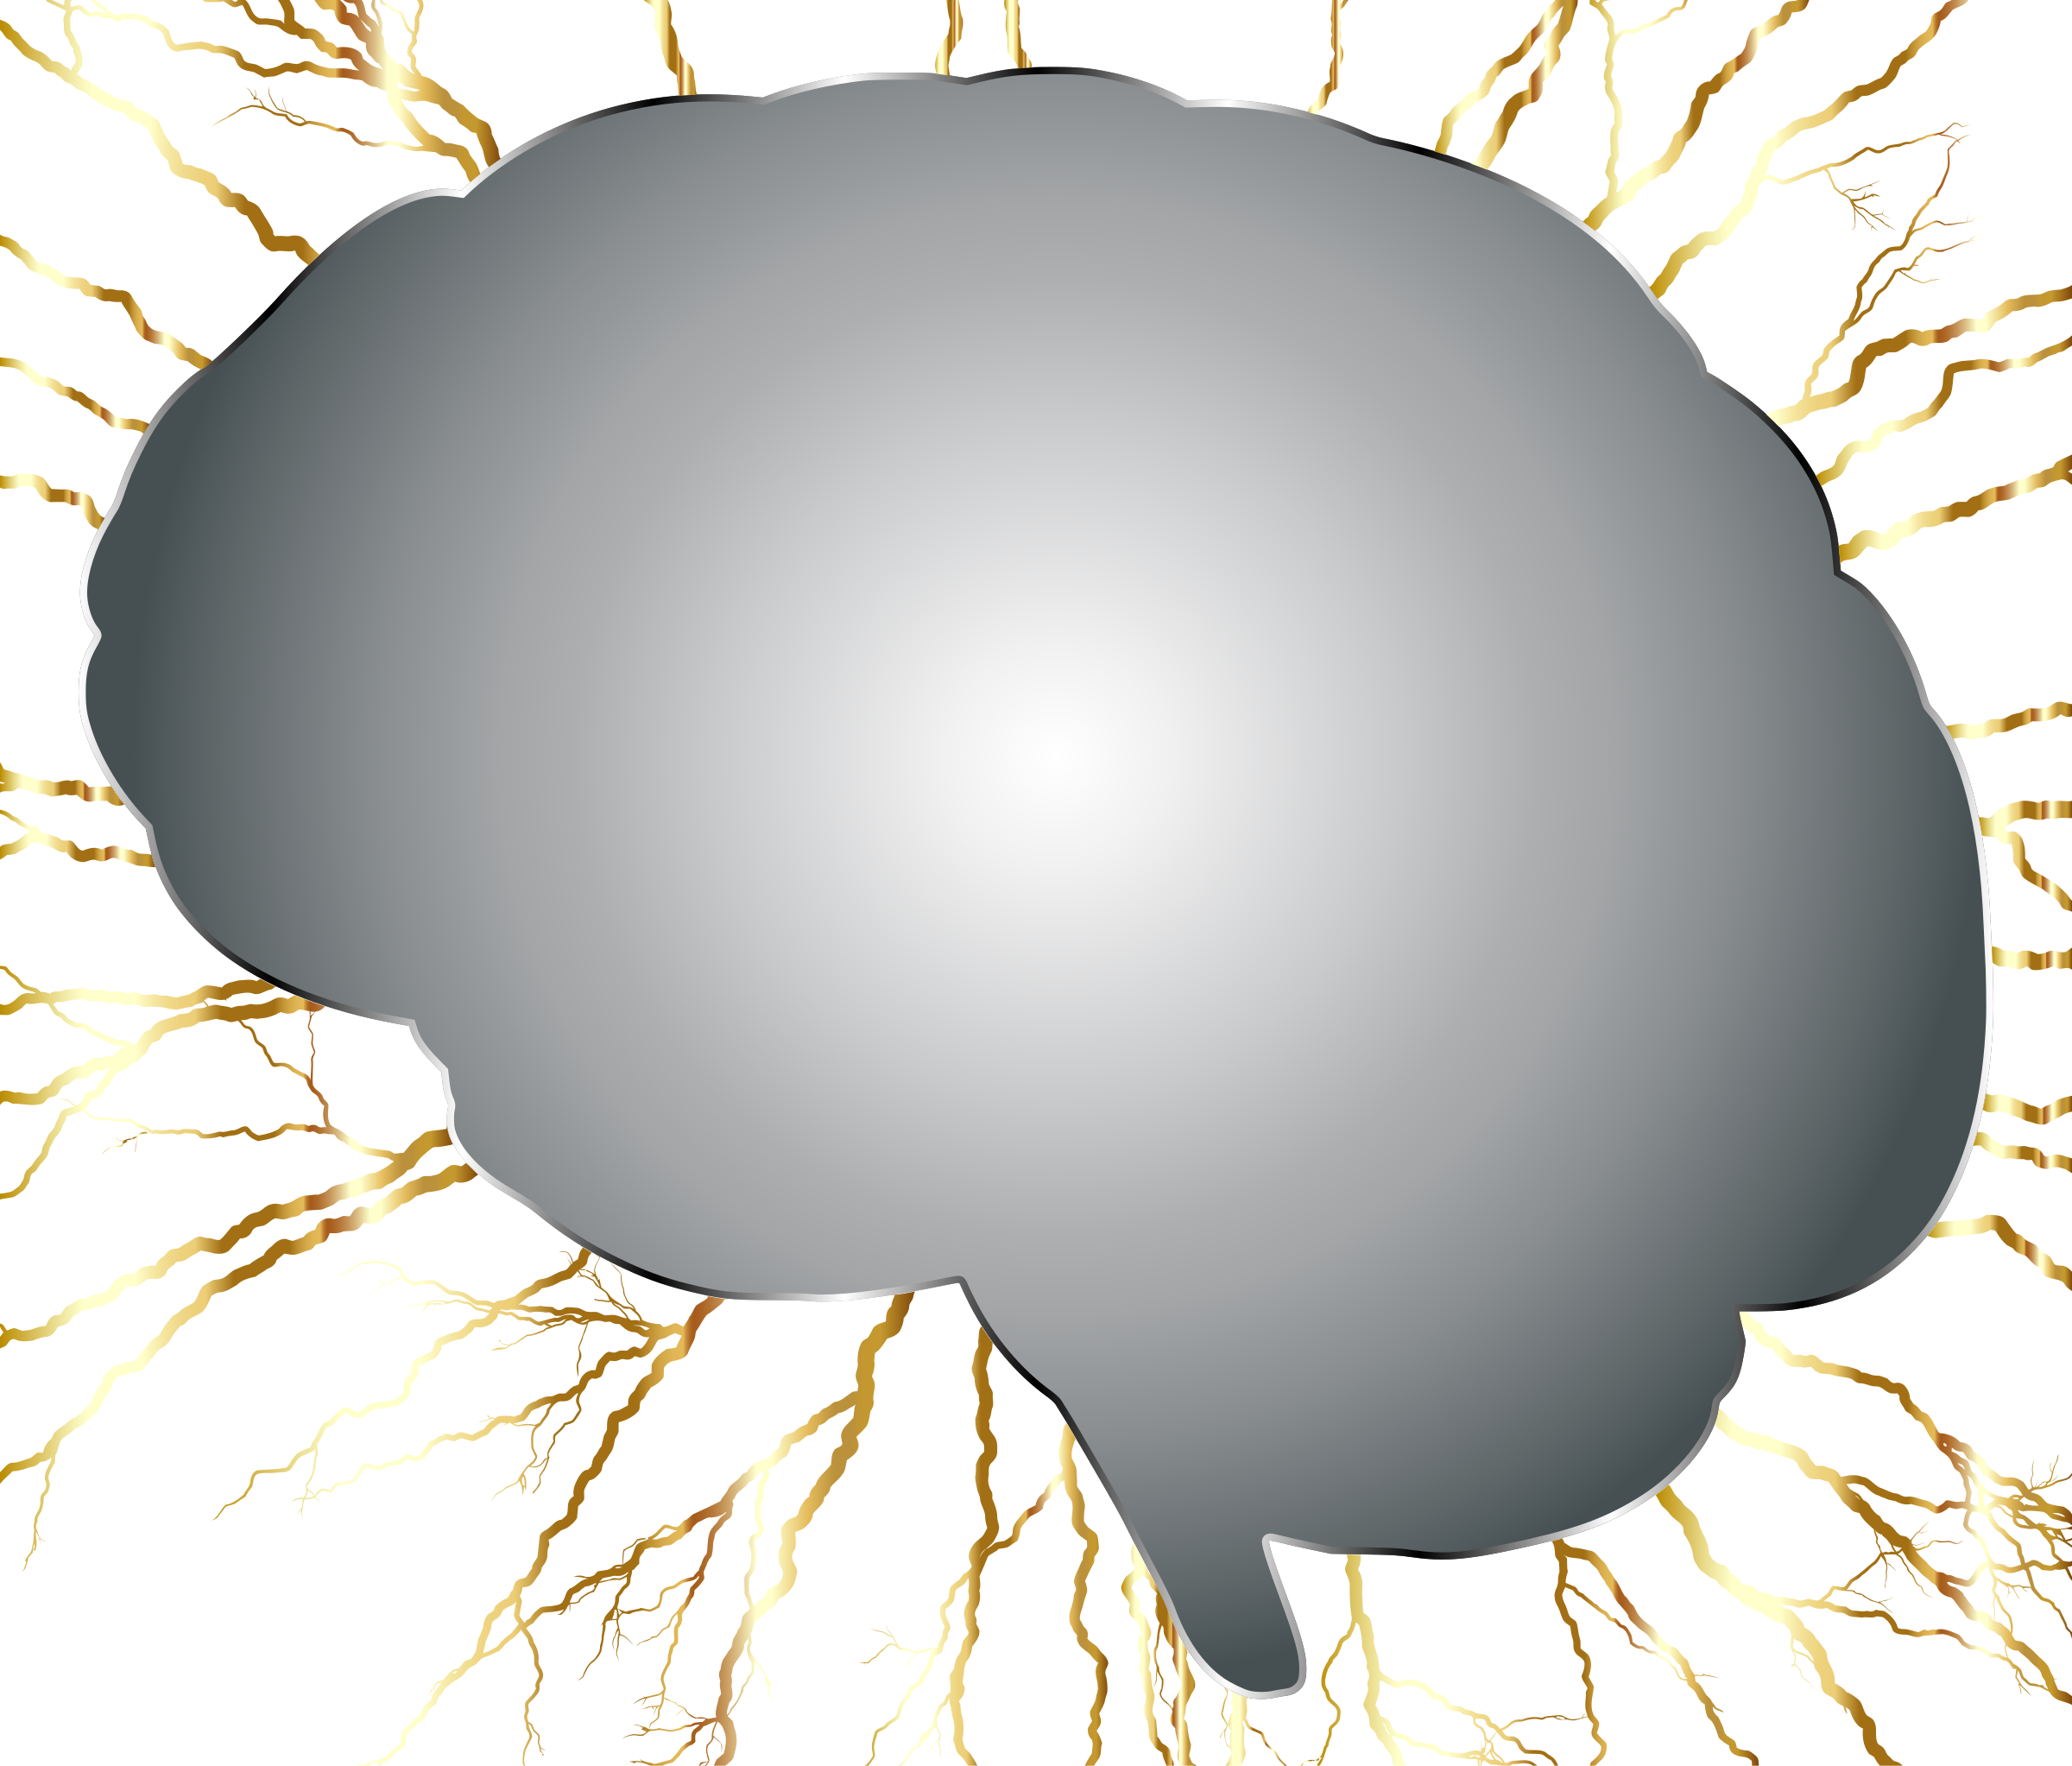 Brain storm no background. Psychology clipart abstract art